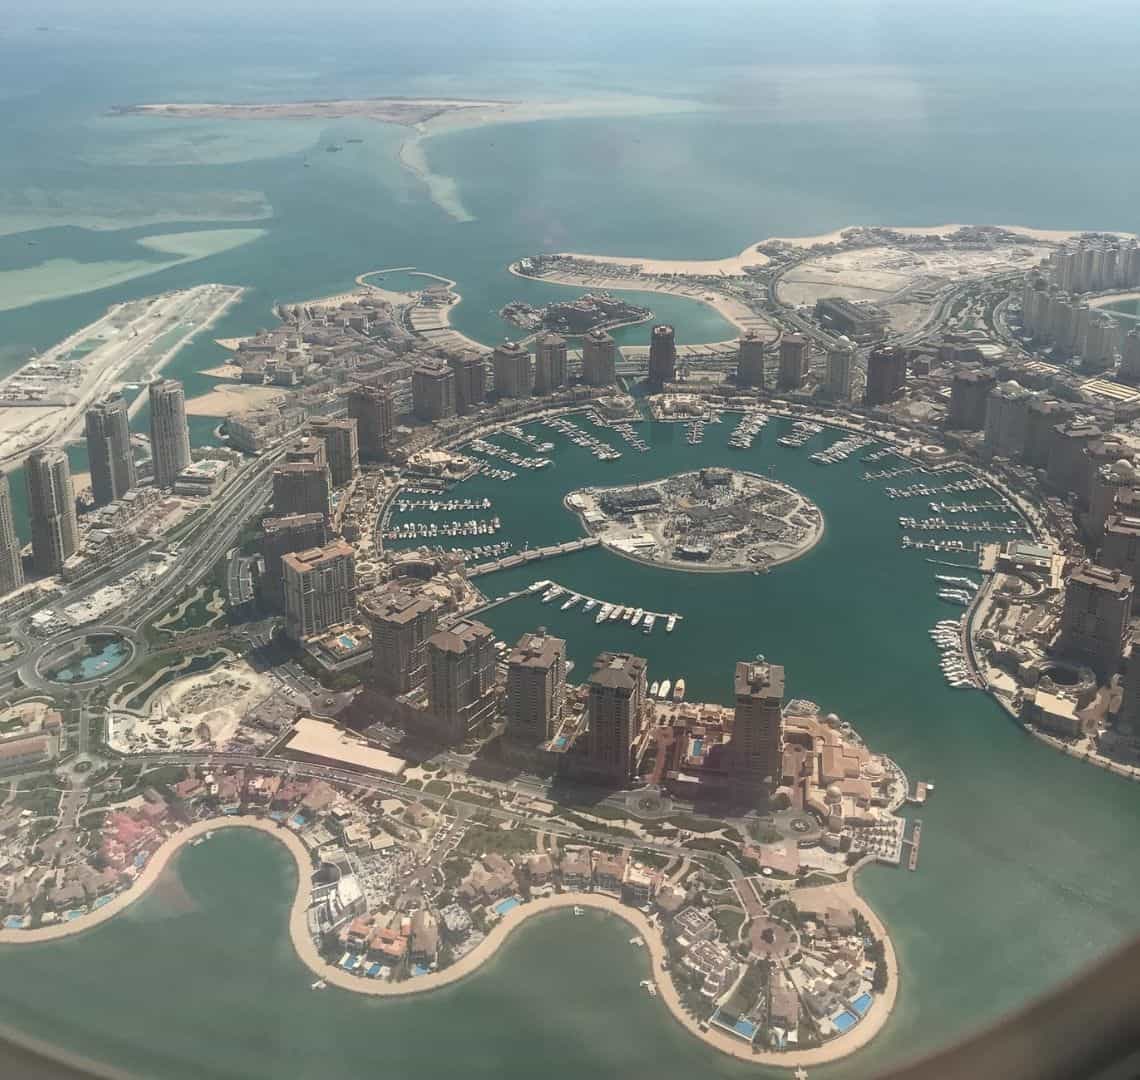 How to Repatriate Well - Dona from a plane. The circular layout of the pearl with its sand bars, high rise condominiums and aqua sea is visible from the window